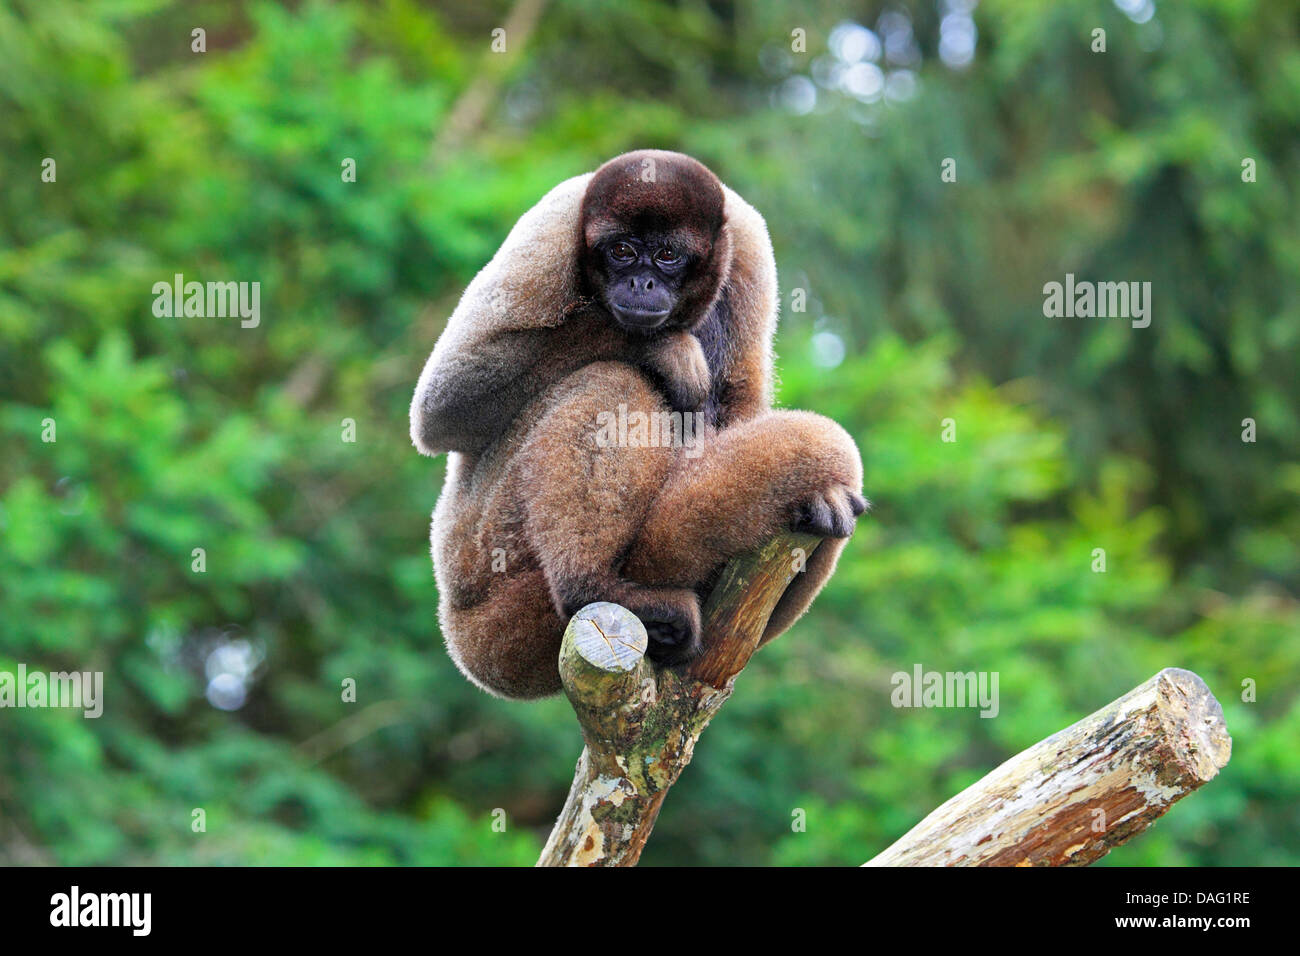 Common woolly monkey, Humboldt's woolly monkey, Brown woolly monkey (Lagothrix lagotricha), sitting on a climbing tree in an open-air enclosure Stock Photo